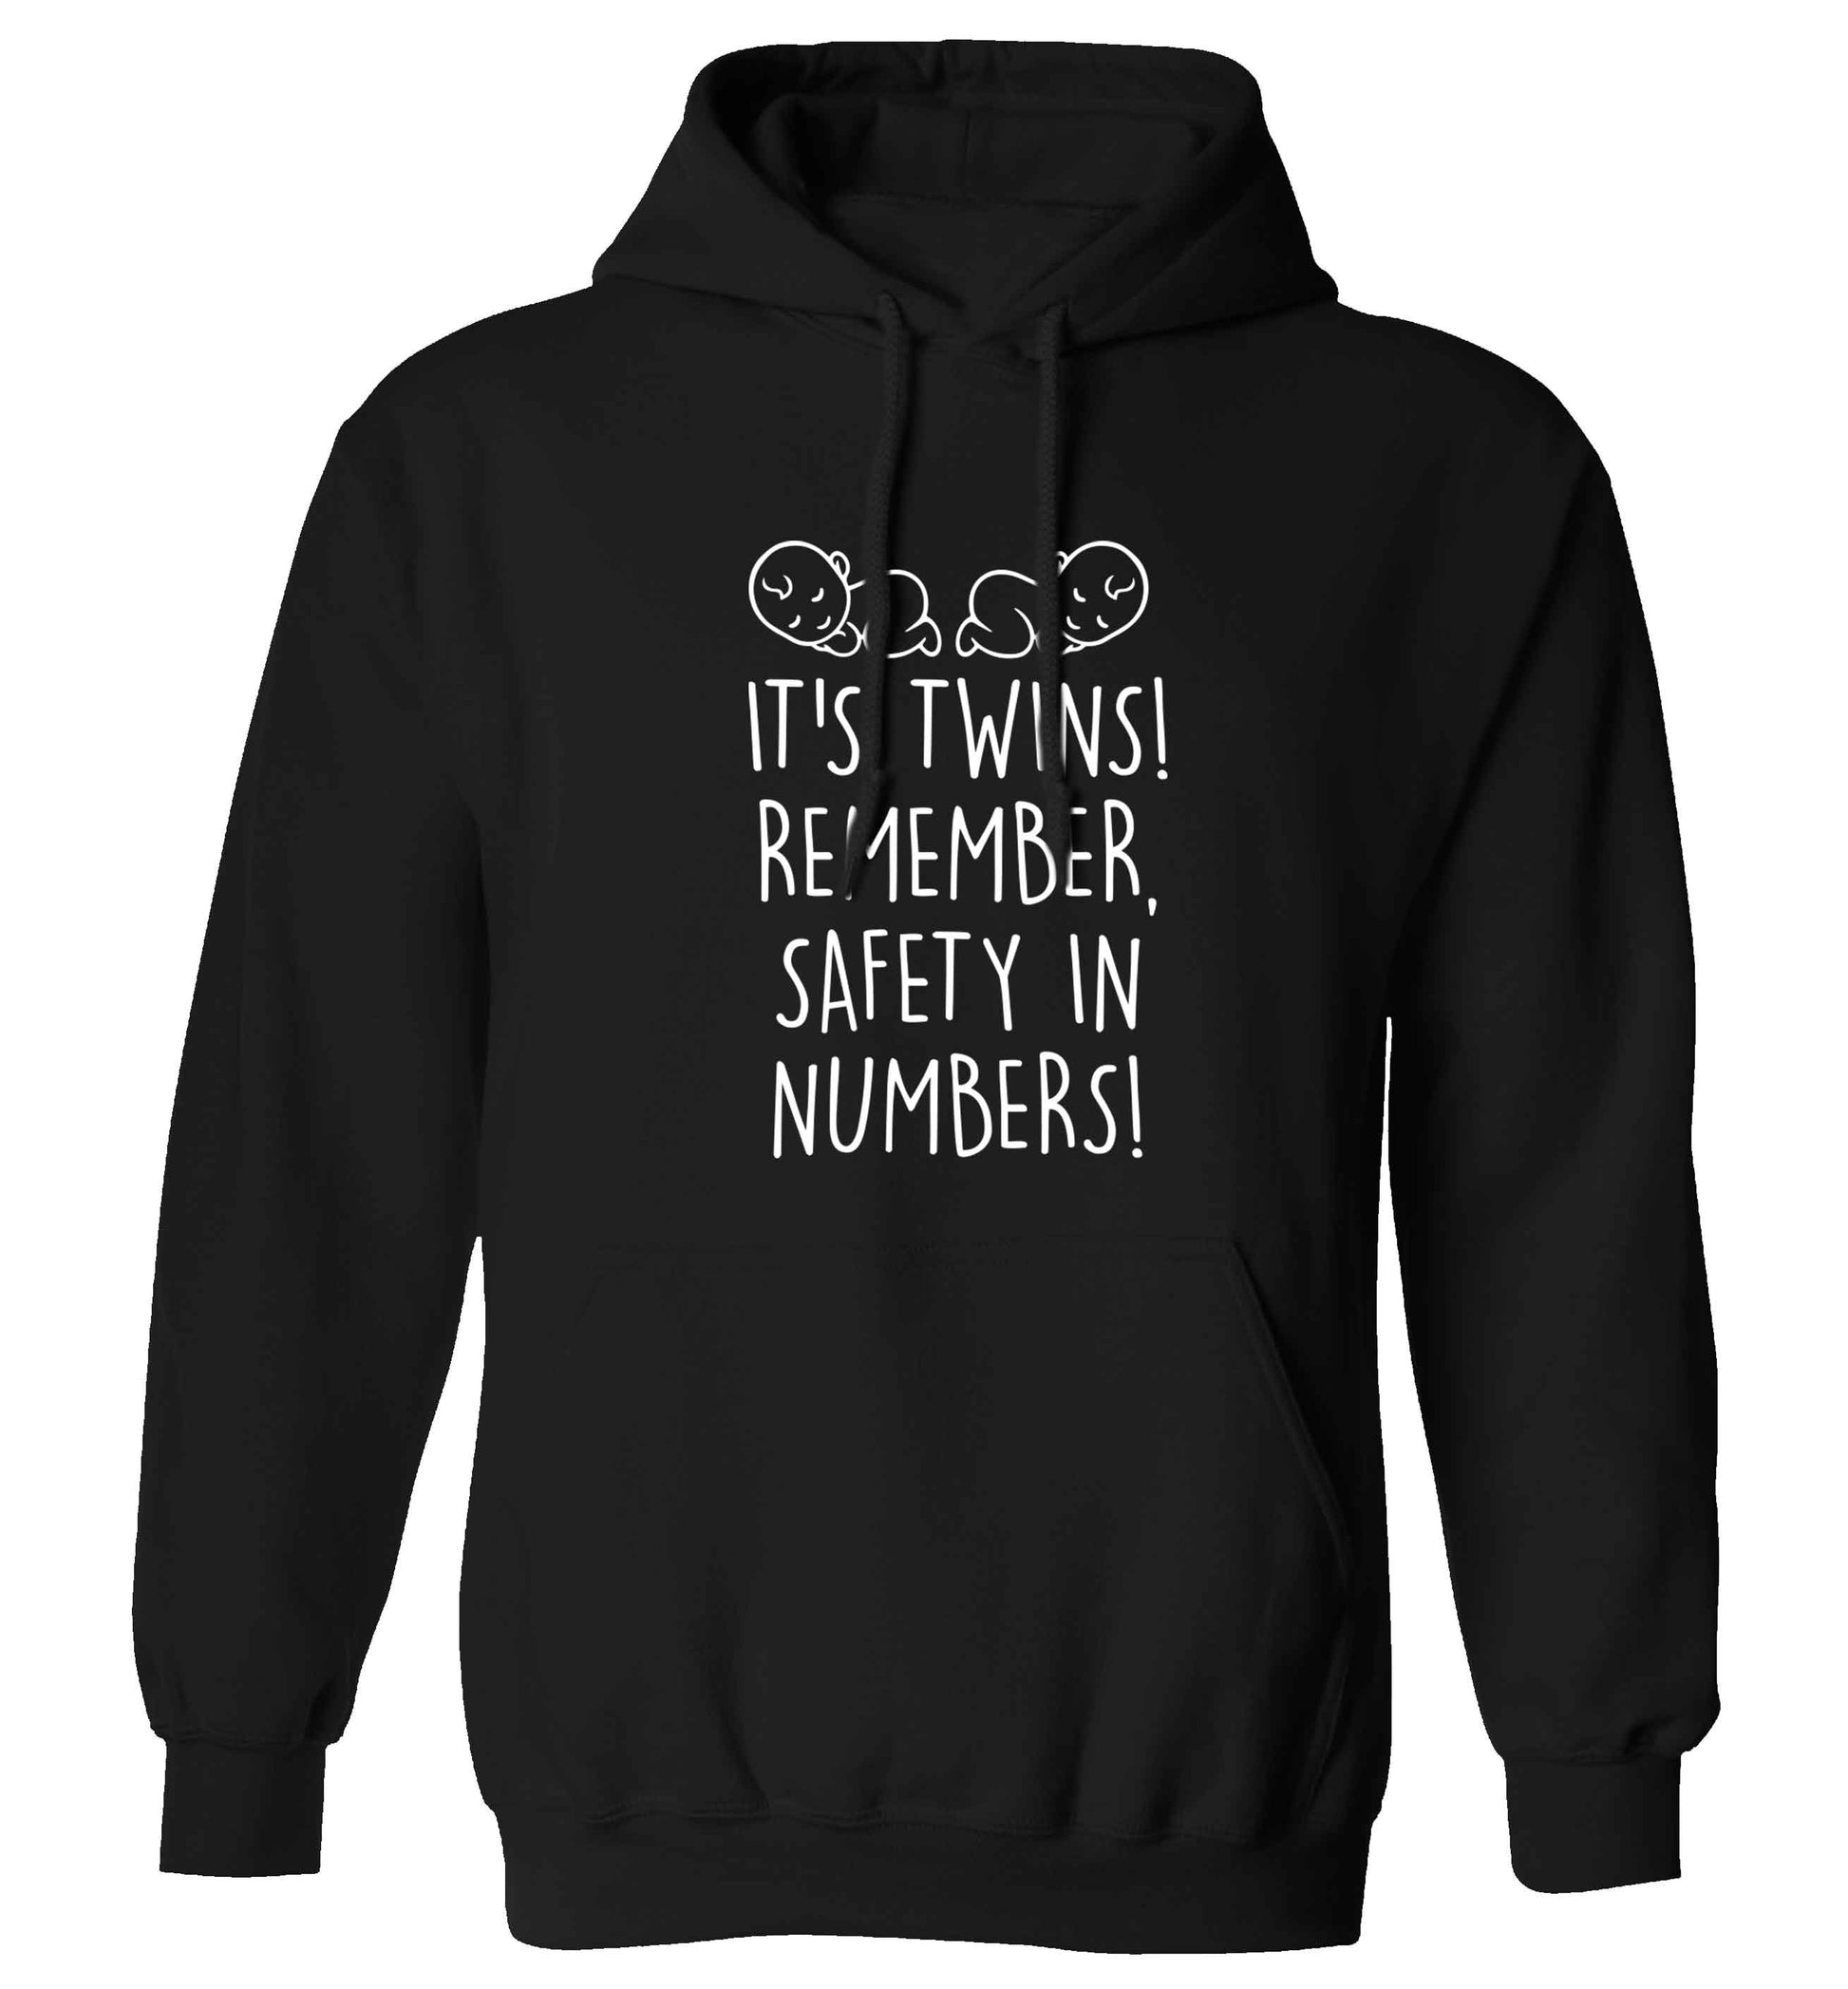 It's twins! Remember safety in numbers! adults unisex black hoodie 2XL